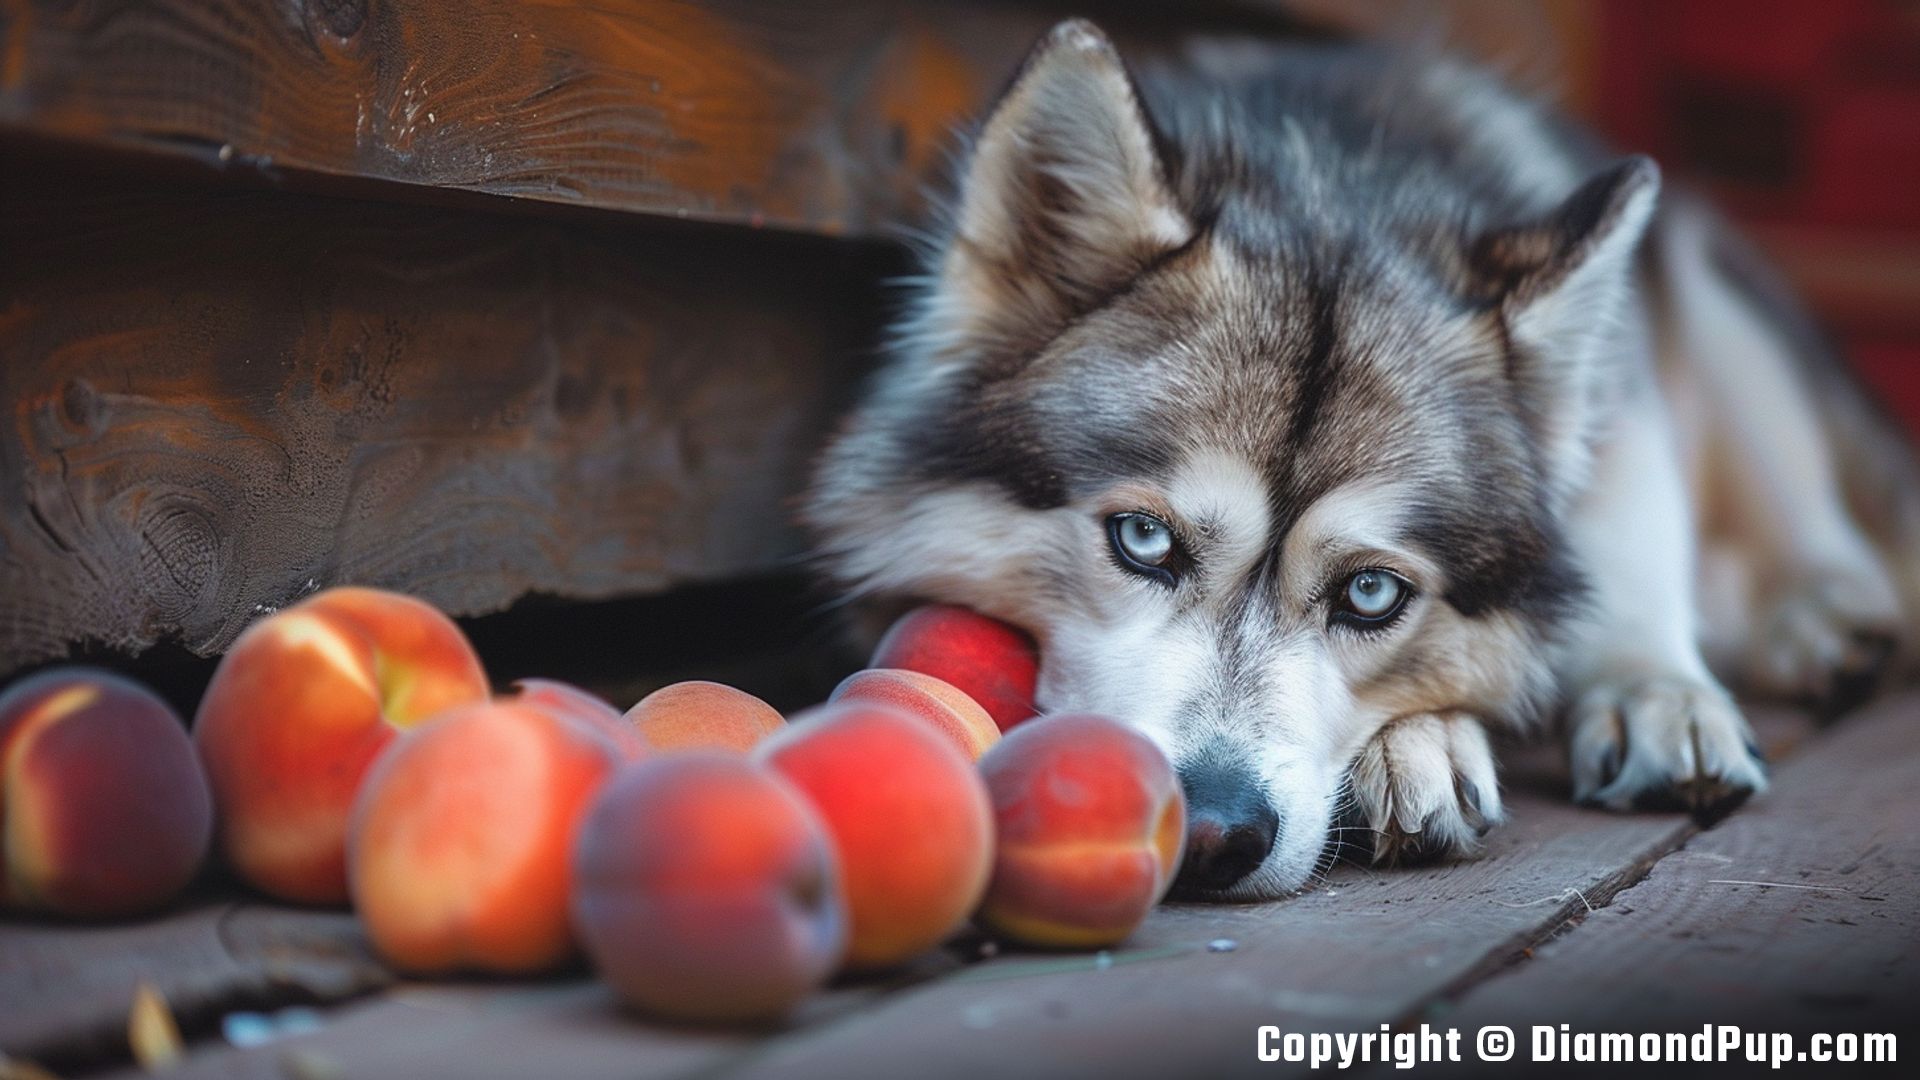 Photograph of an Adorable Husky Snacking on Peaches